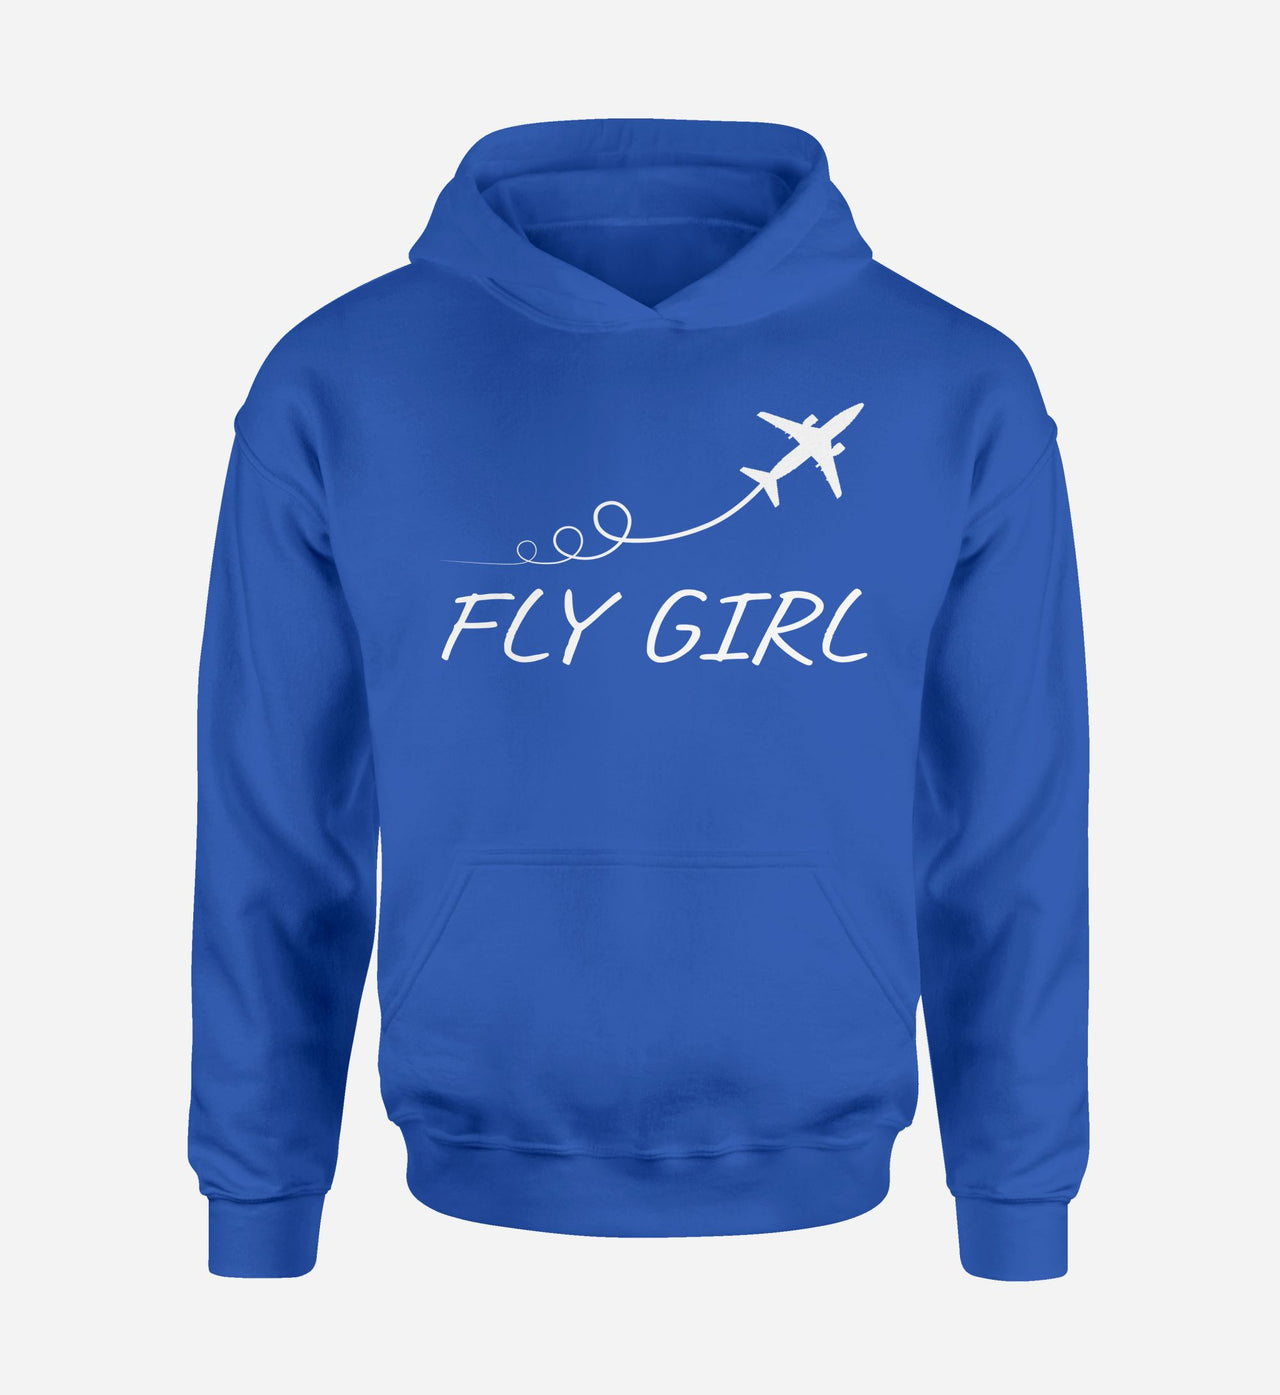 Just Fly It & Fly Girl Designed Hoodies